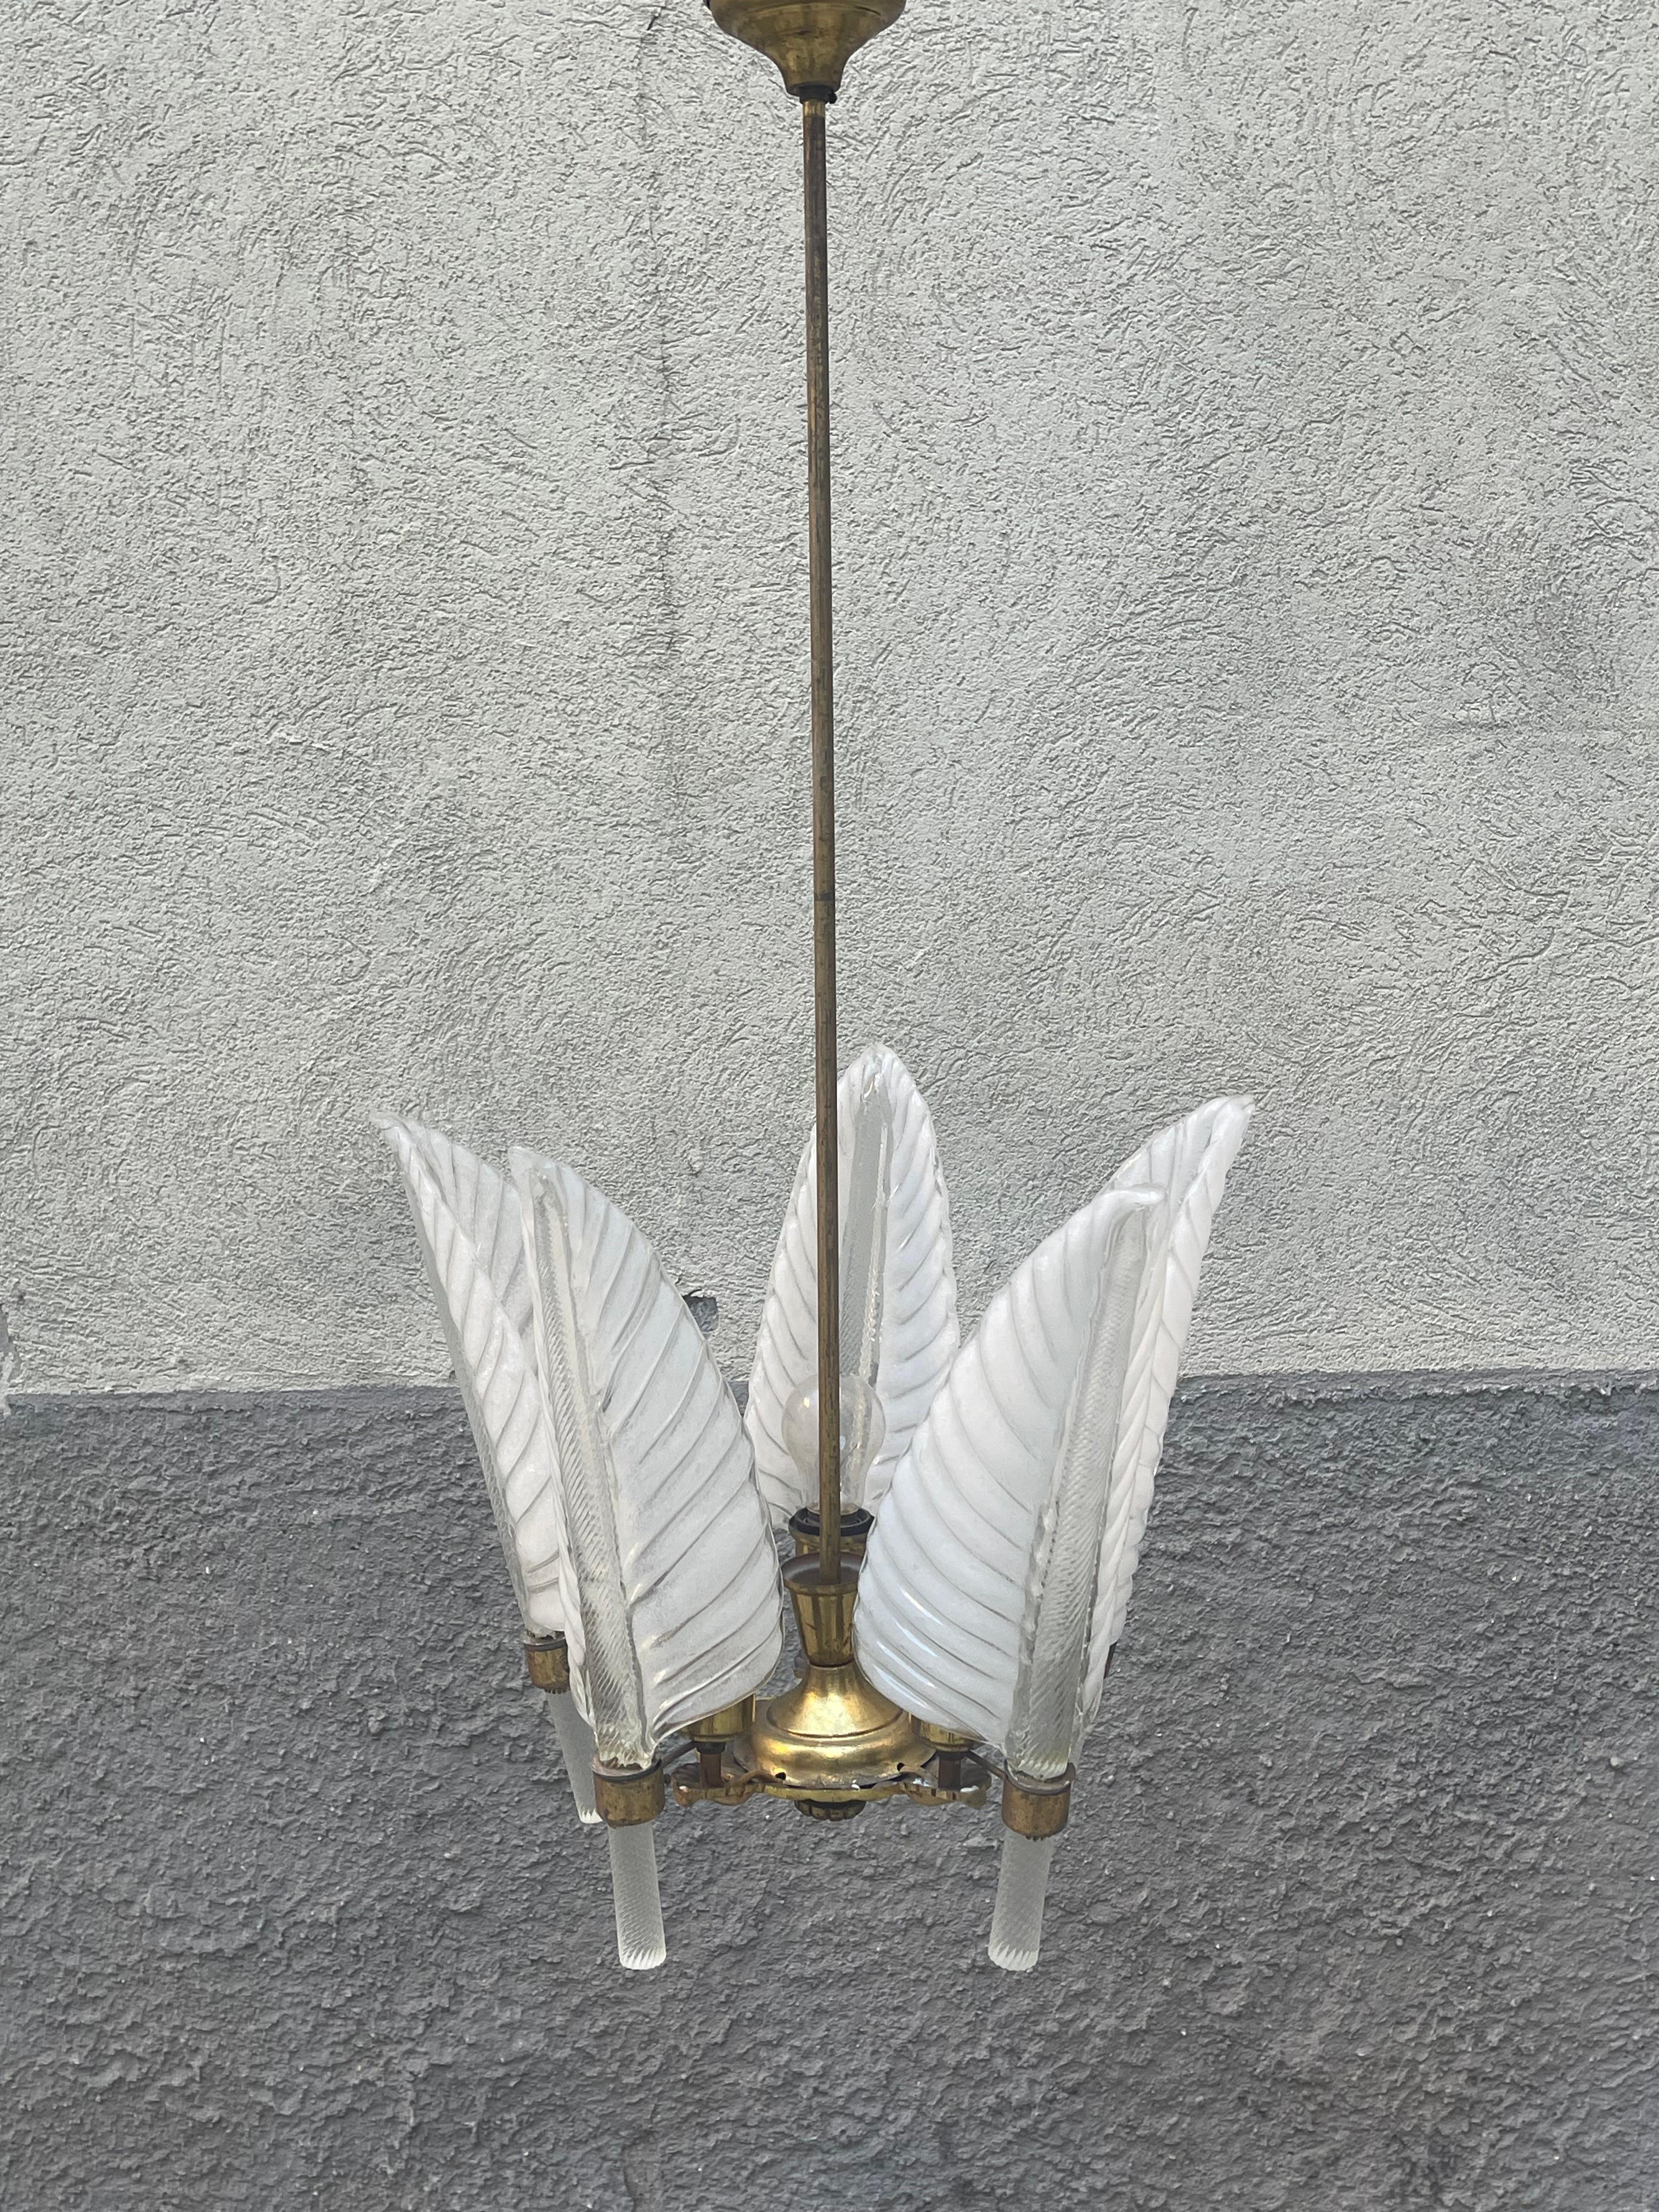 Refined Murano chandelier by Archimede Seguso, designed and made in the 1940s.
A gilded bronze casting houses five magnificent blown glass leaves and twisted stem, a full 39cm high.
Each of these leaves hides a light bulb that is illuminated by